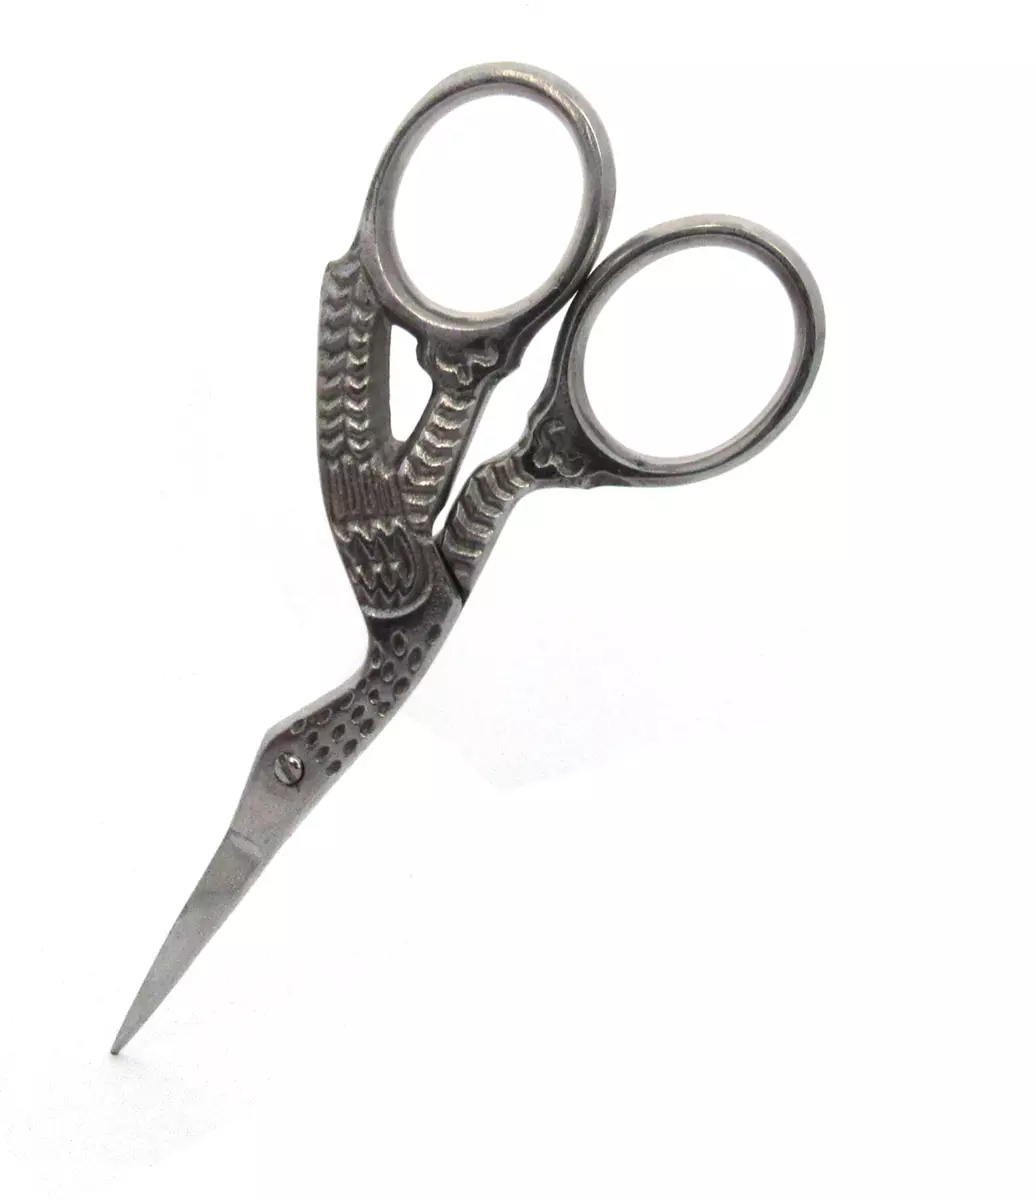 NEW Silver Stork Mini Scissors 3.5 for Embroidery Sewing Herbs